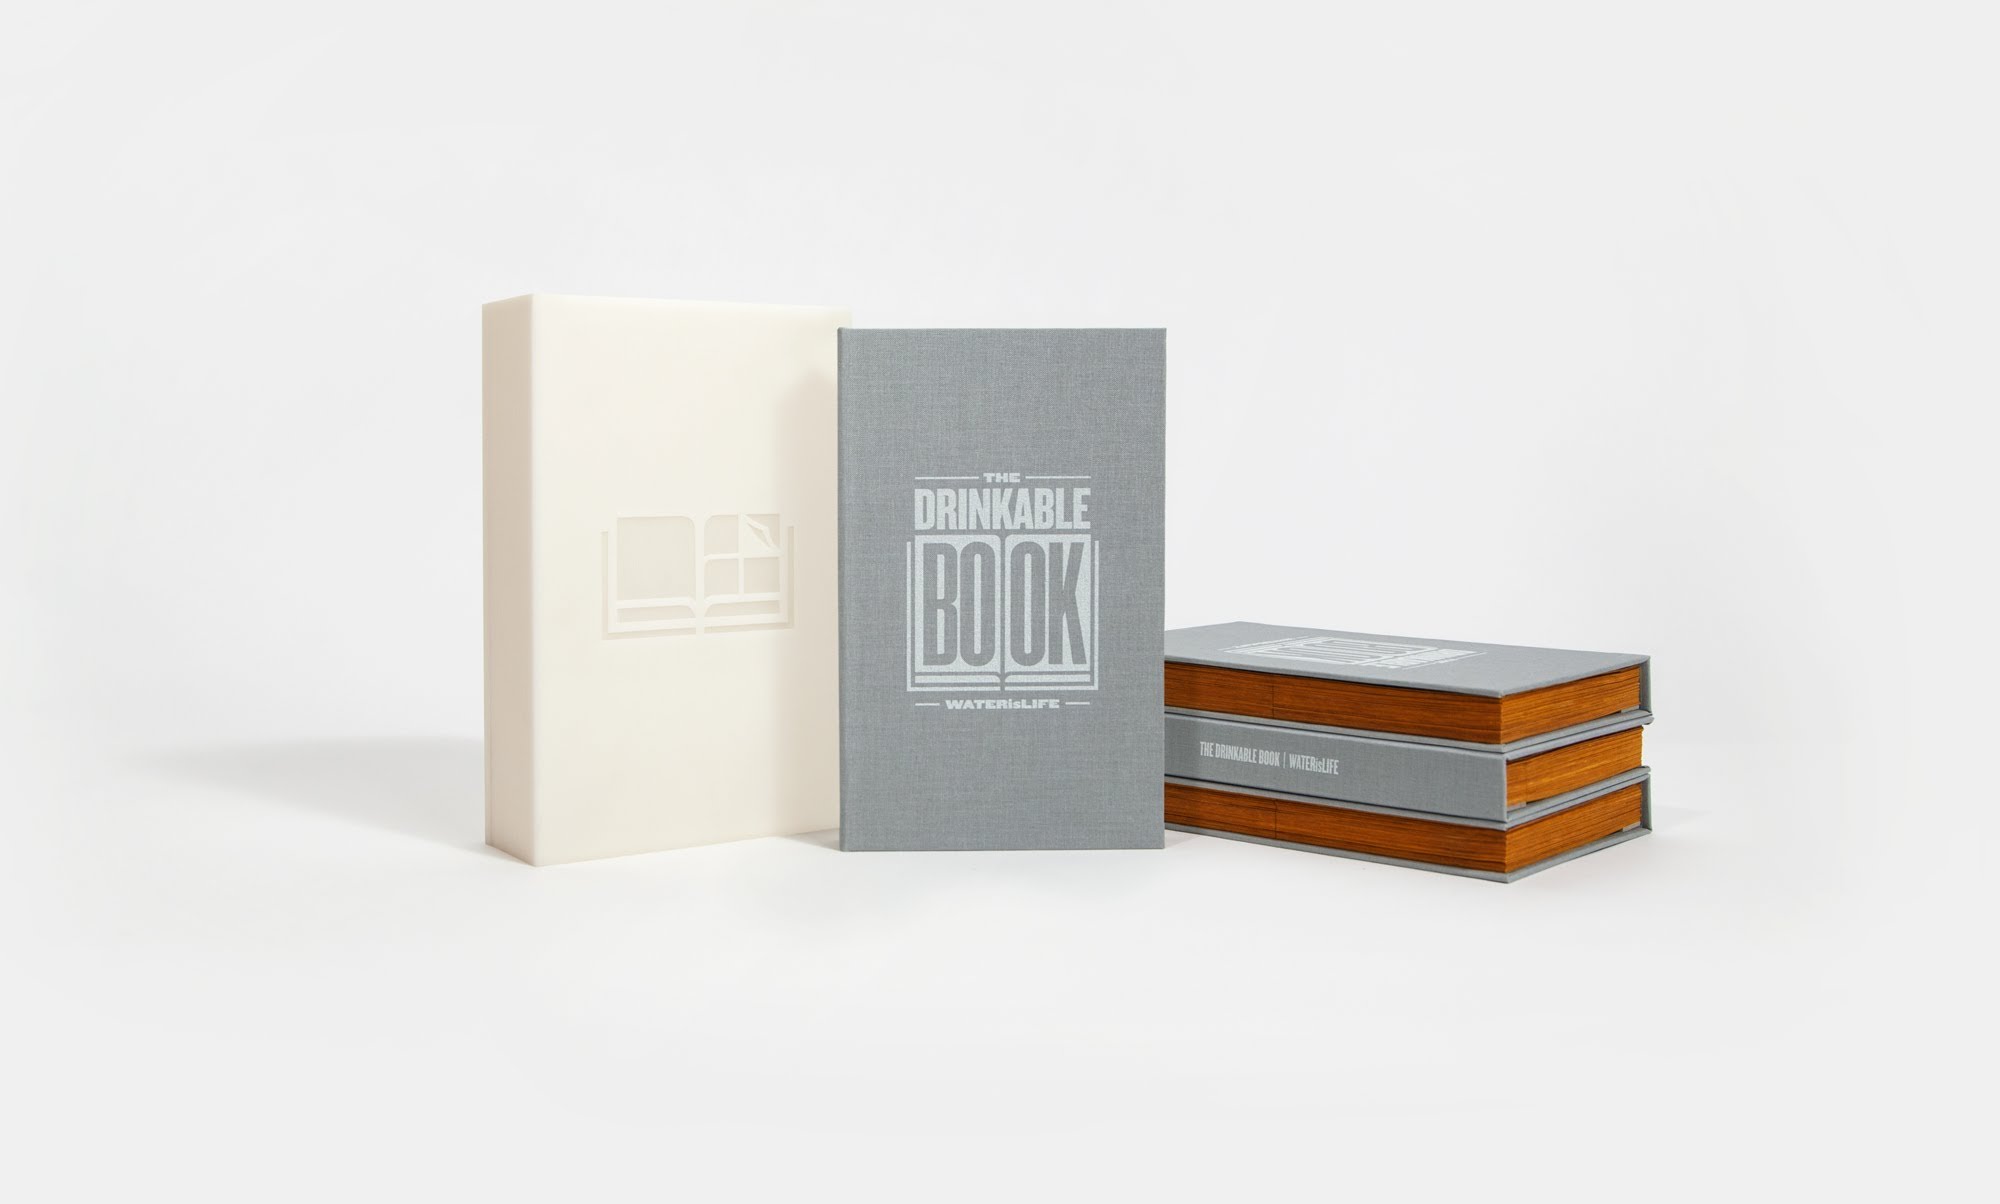 This New Life Saving “Drinkable Book” Can Provide Clean Water For Up To Four Years